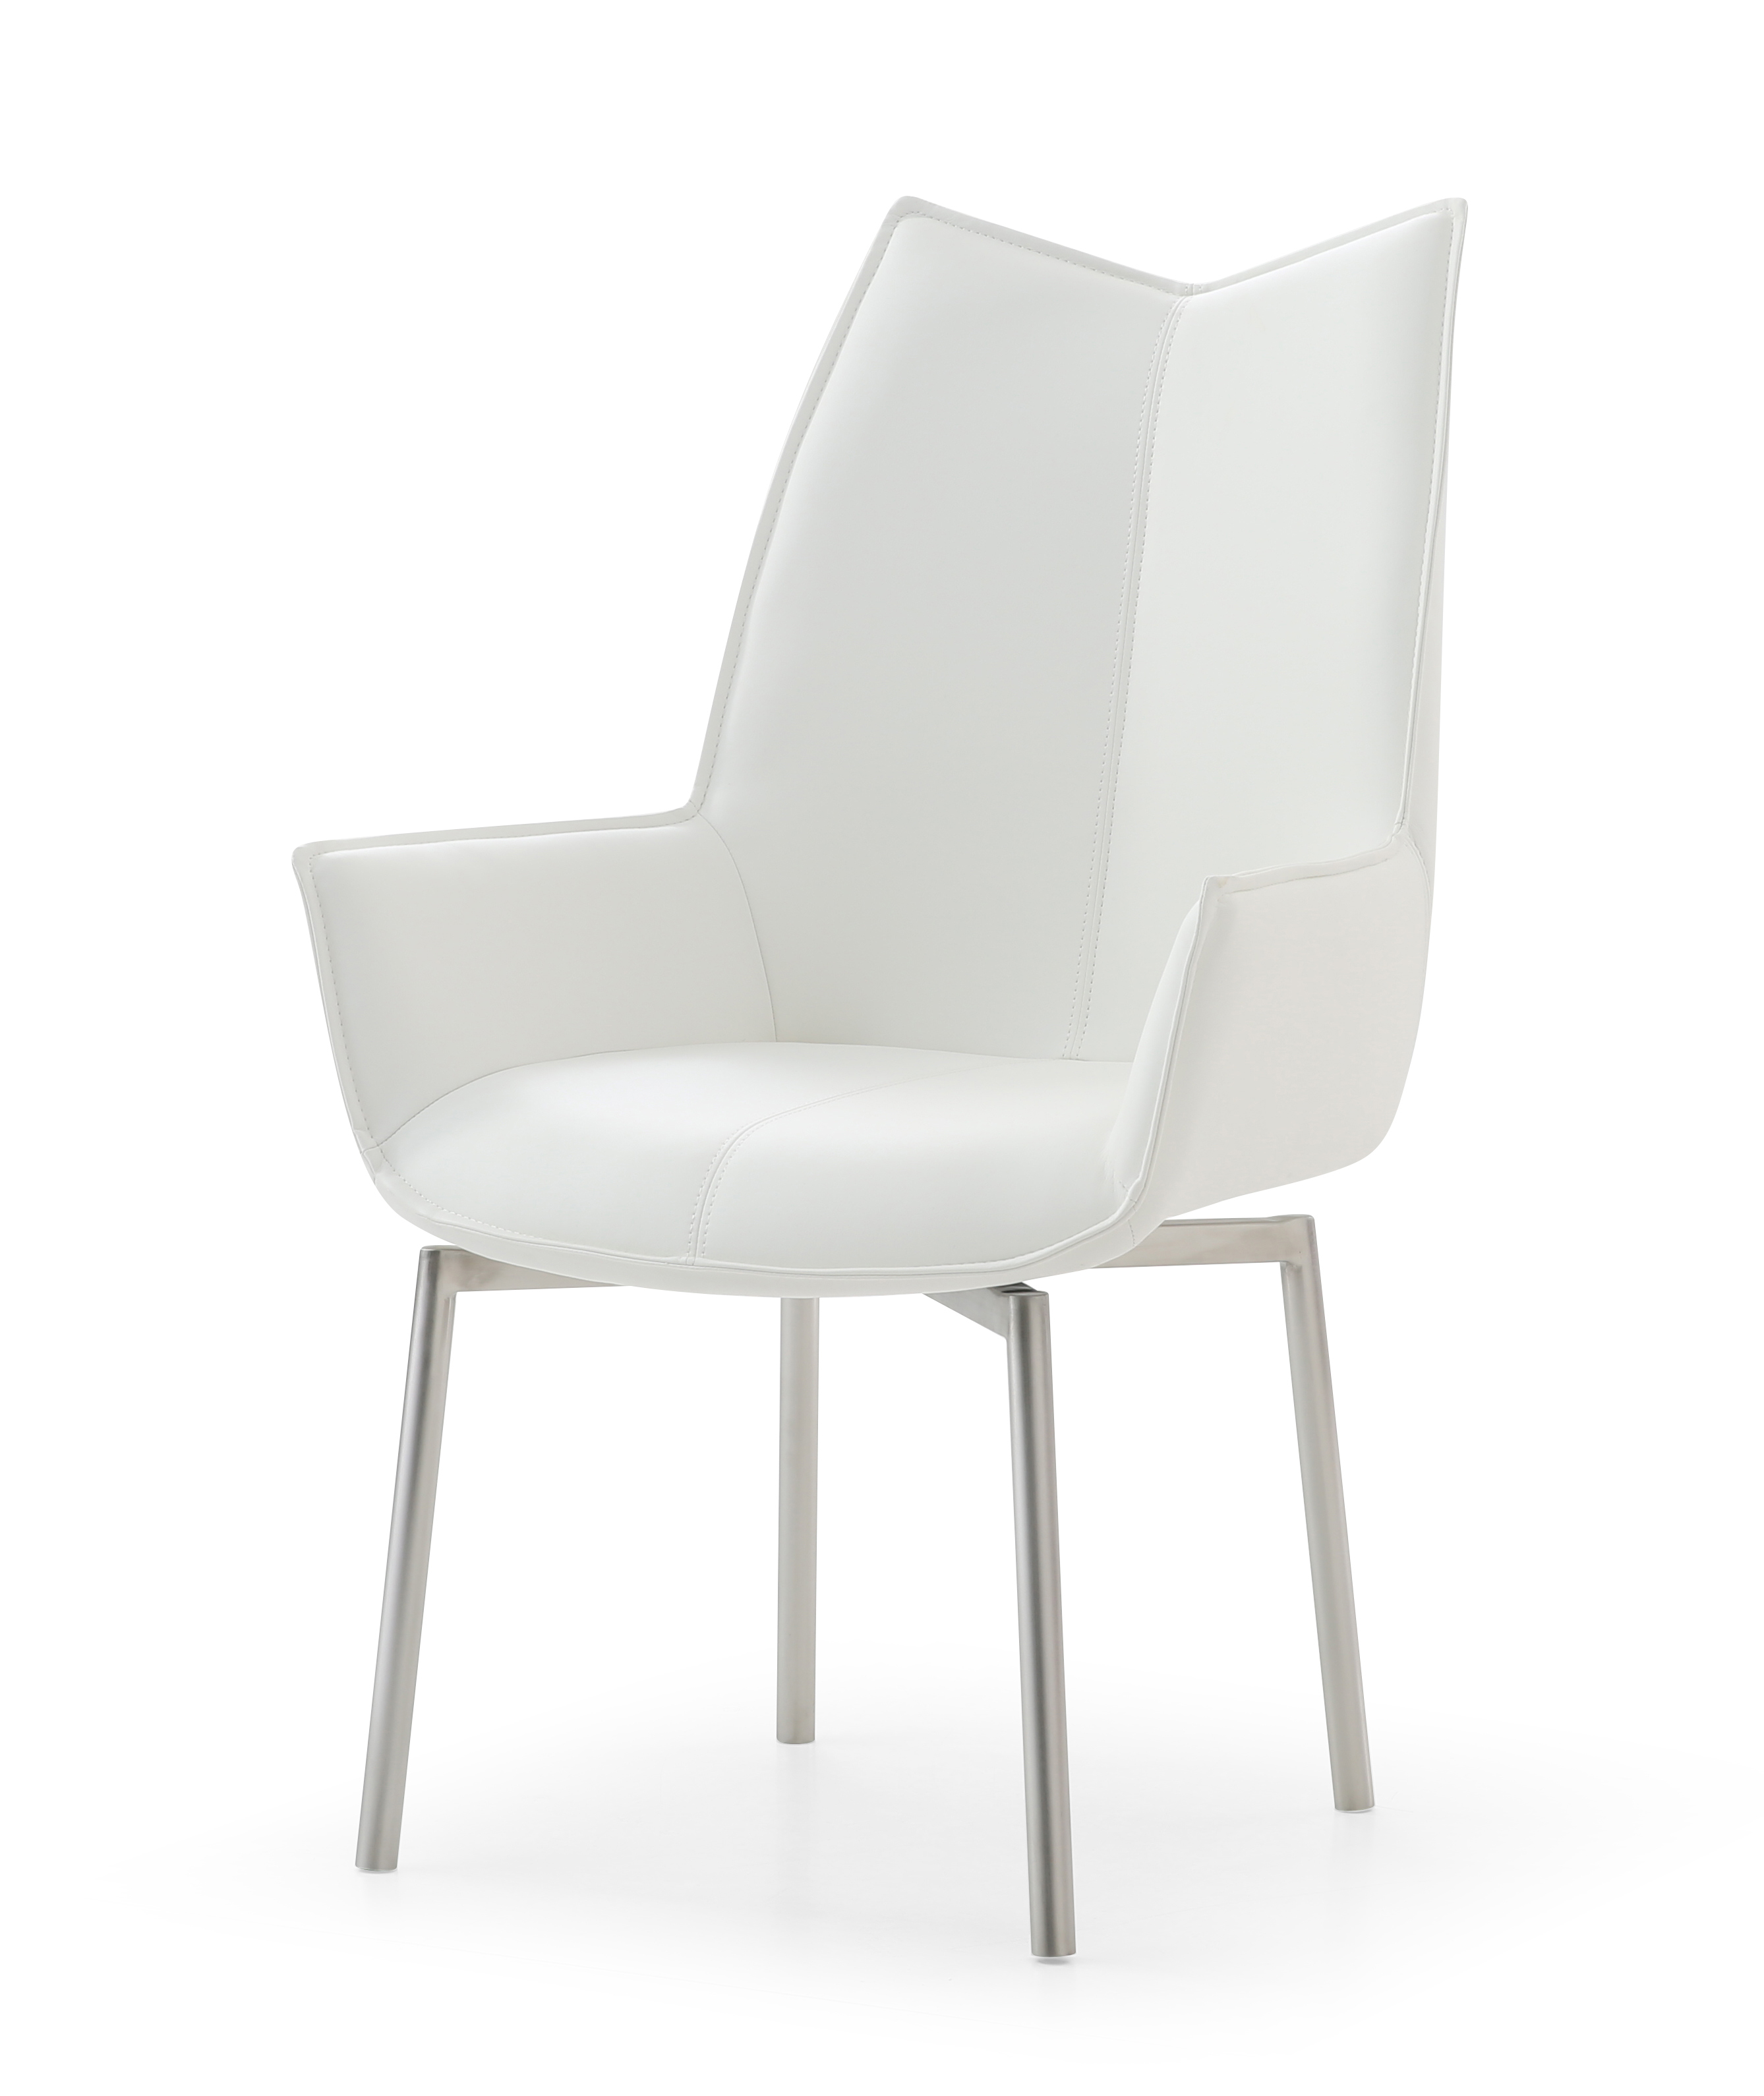 Dining Room Furniture Chairs 1218 Dining Chairs White